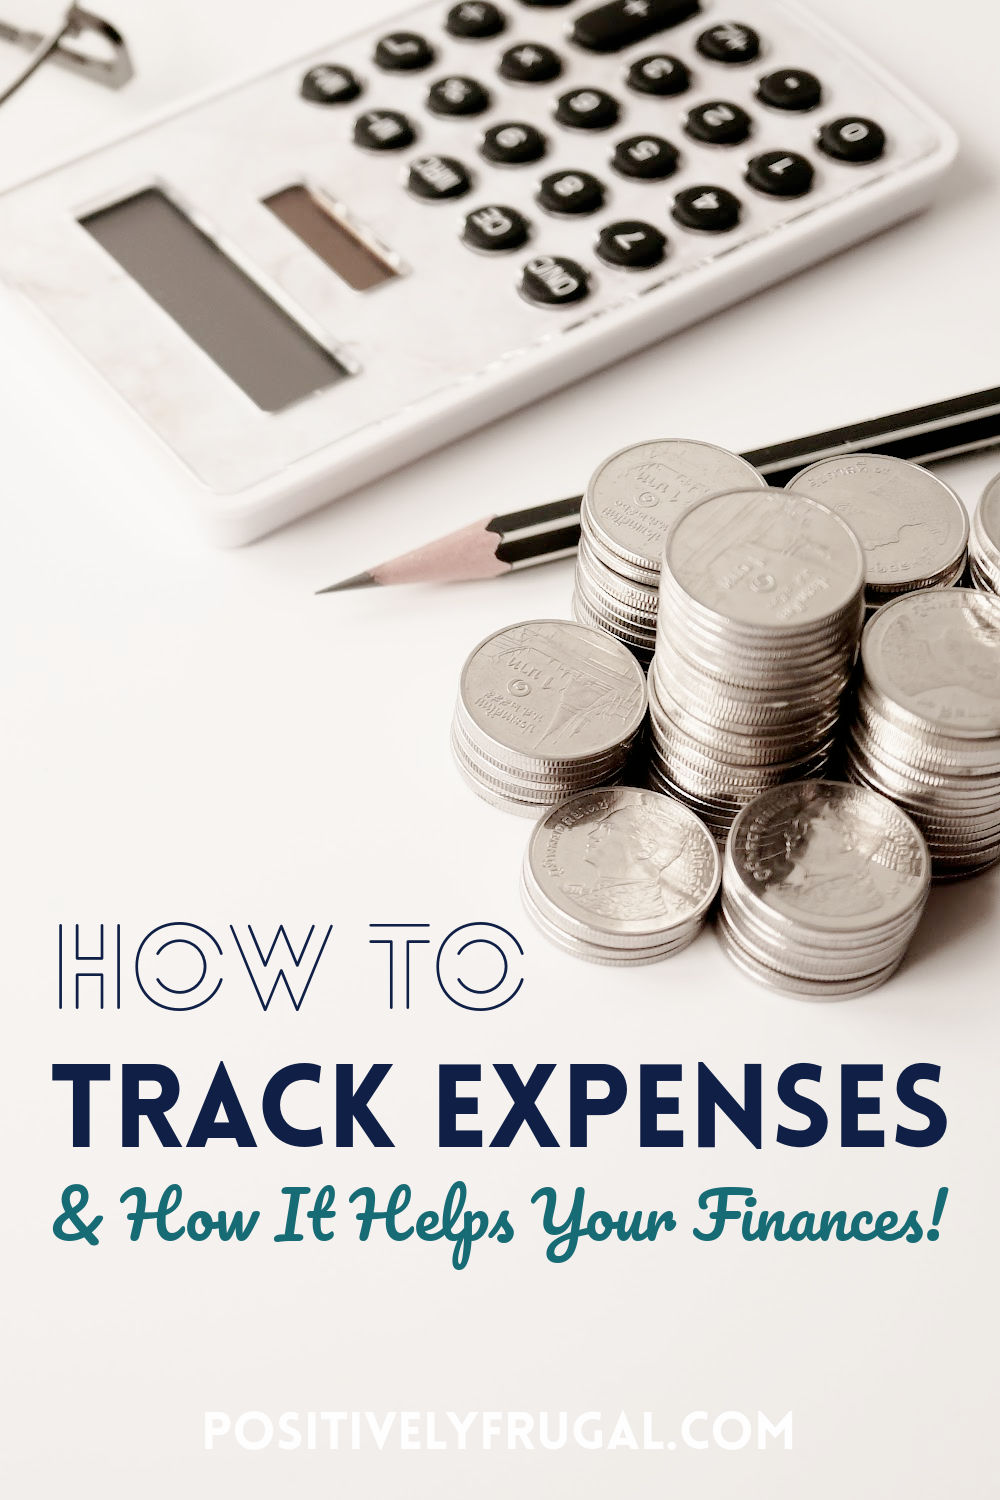 How To Track Expenses and How It Helps Your Finances by PositivelyFrugal.com